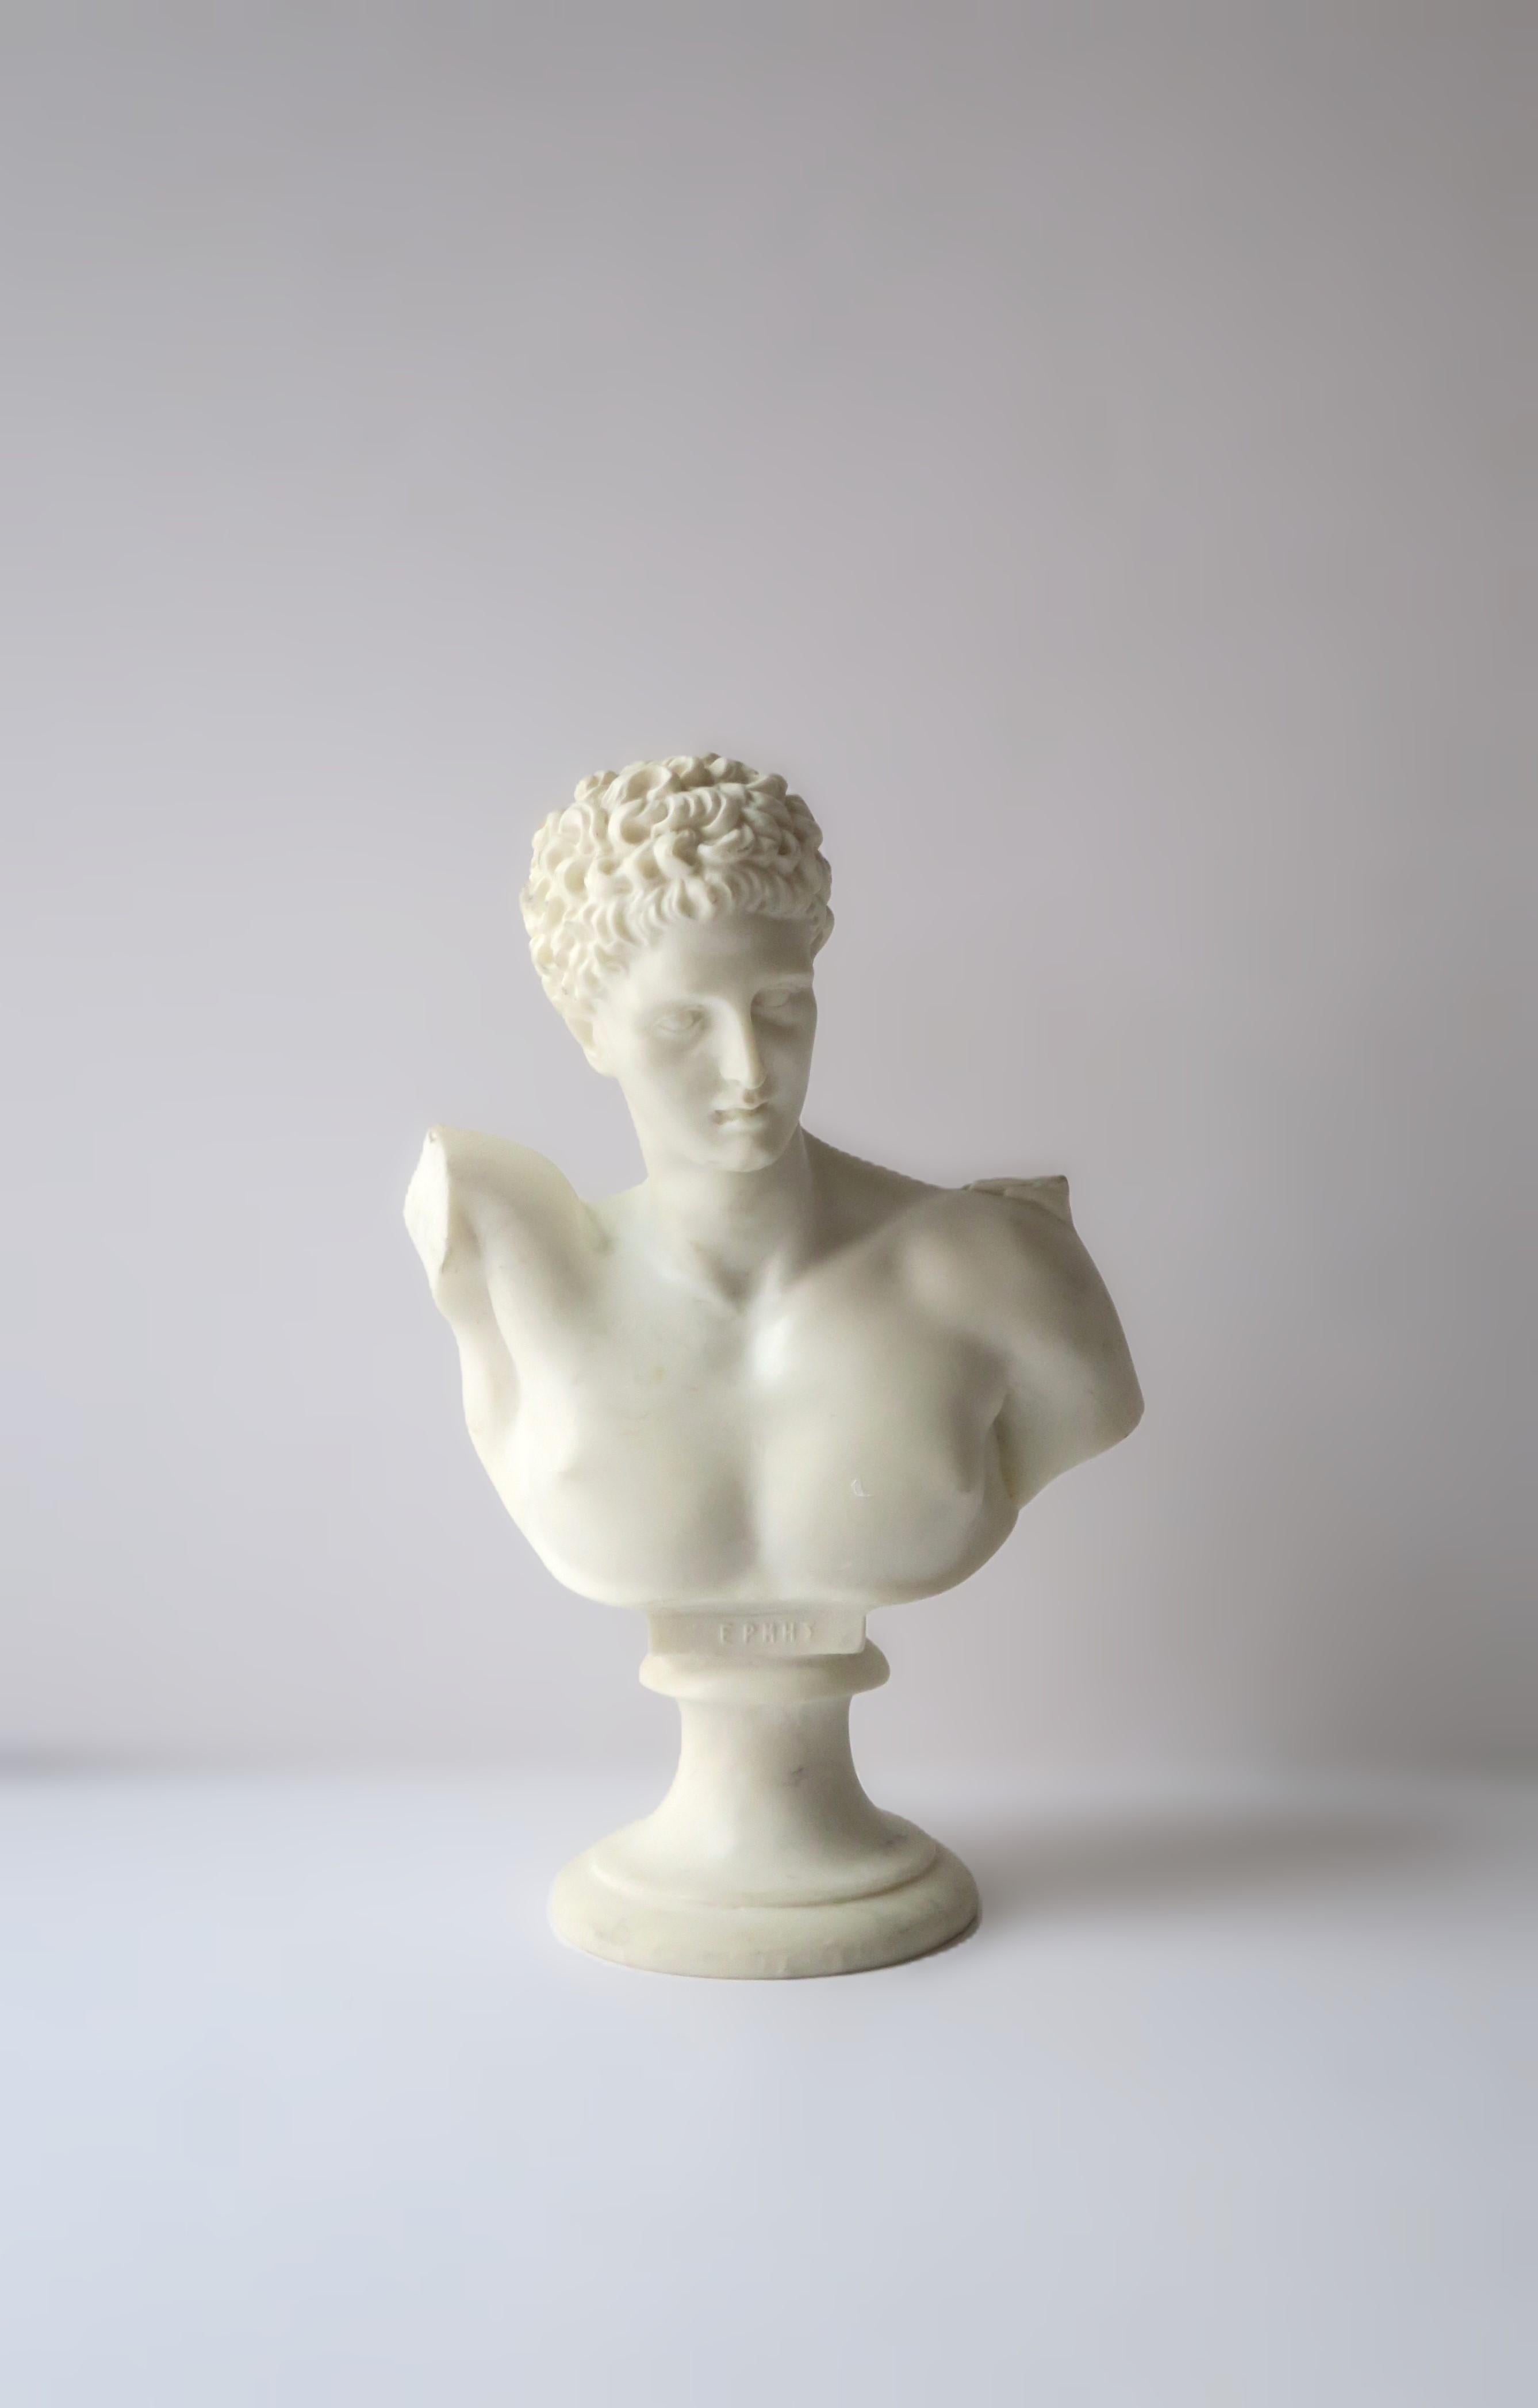 A white alabaster marble bust of ancient Greek god, Hermes. A great decorative object depicting the original sculpture. Piece may work well on a column stand, shelf, bookshelf, library, office, cocktail table, etc. Piece is hand crafted. Dimensions: